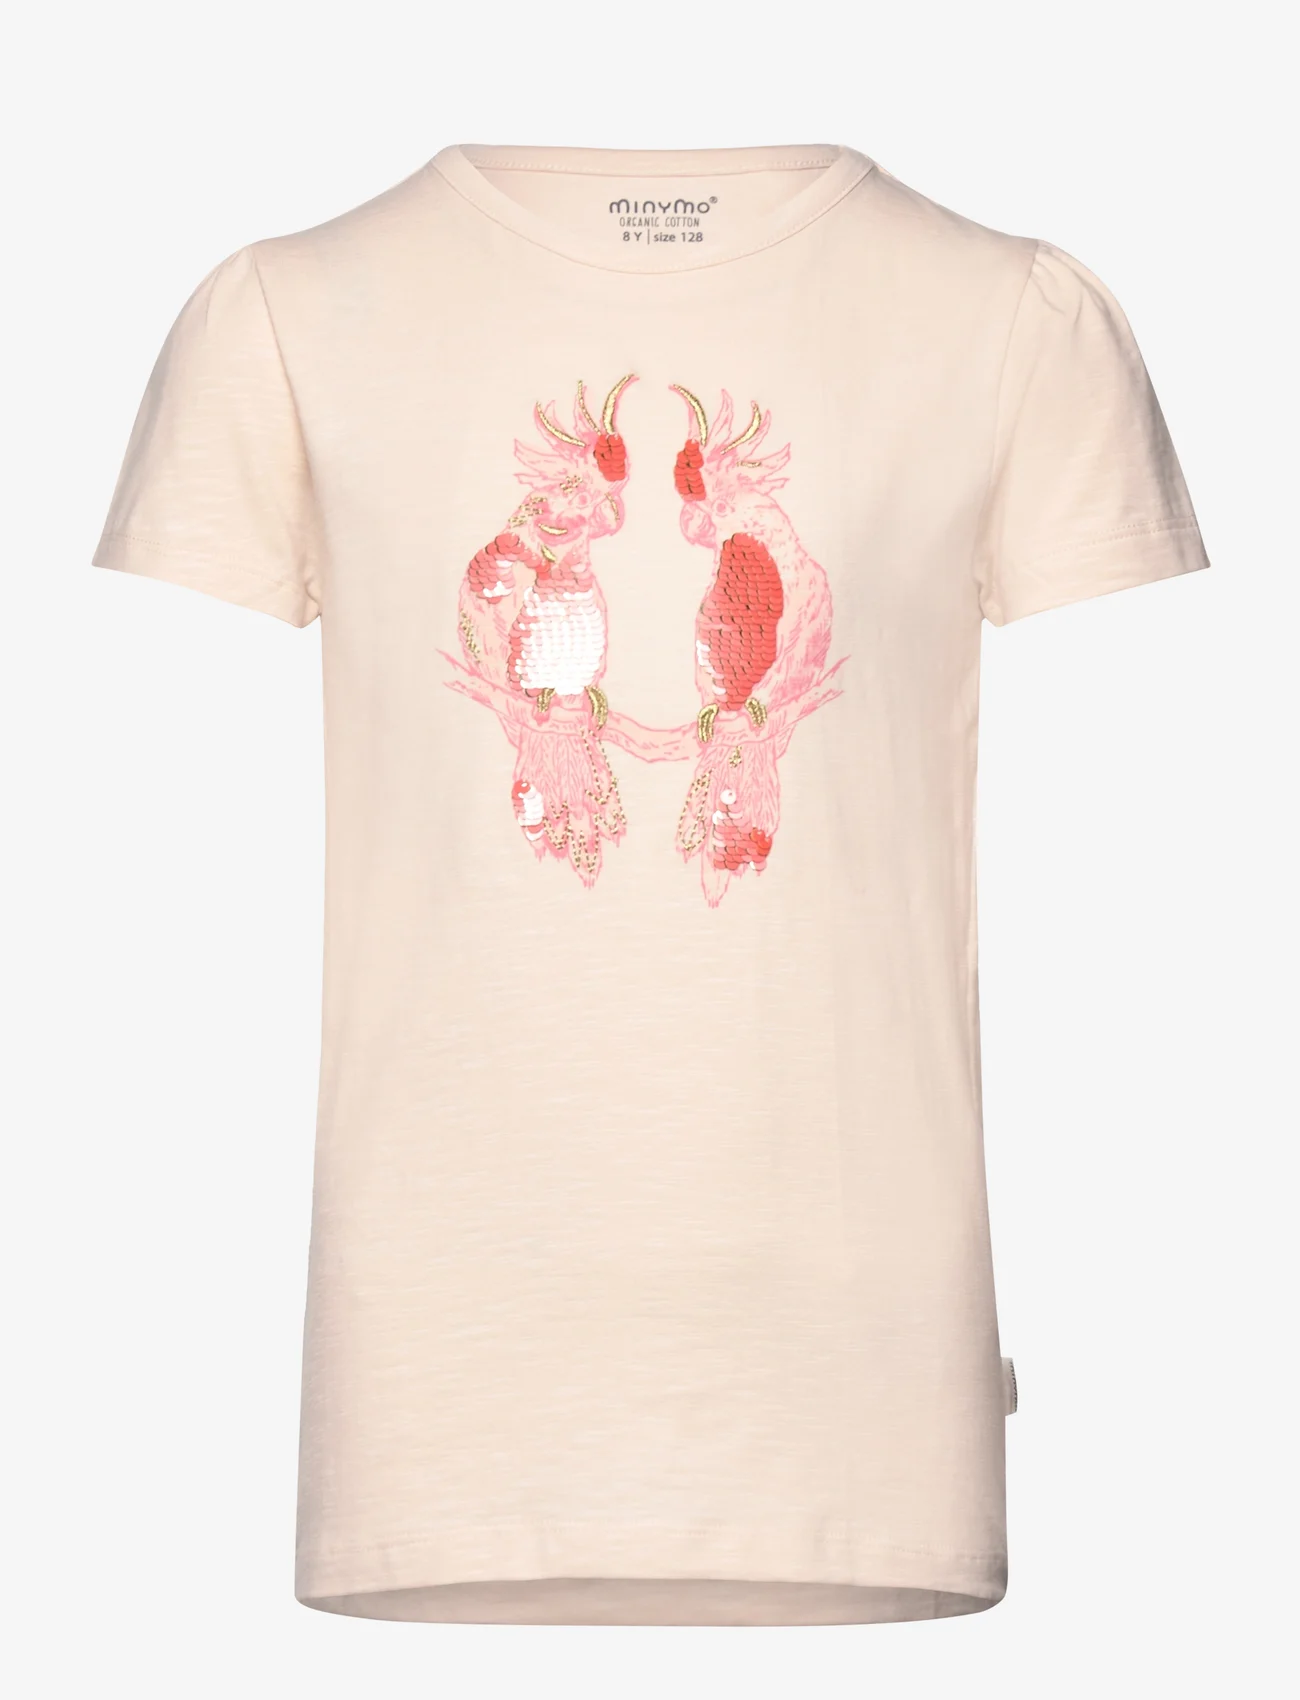 Minymo - T-shirt SS - short-sleeved - pink champagne - 0